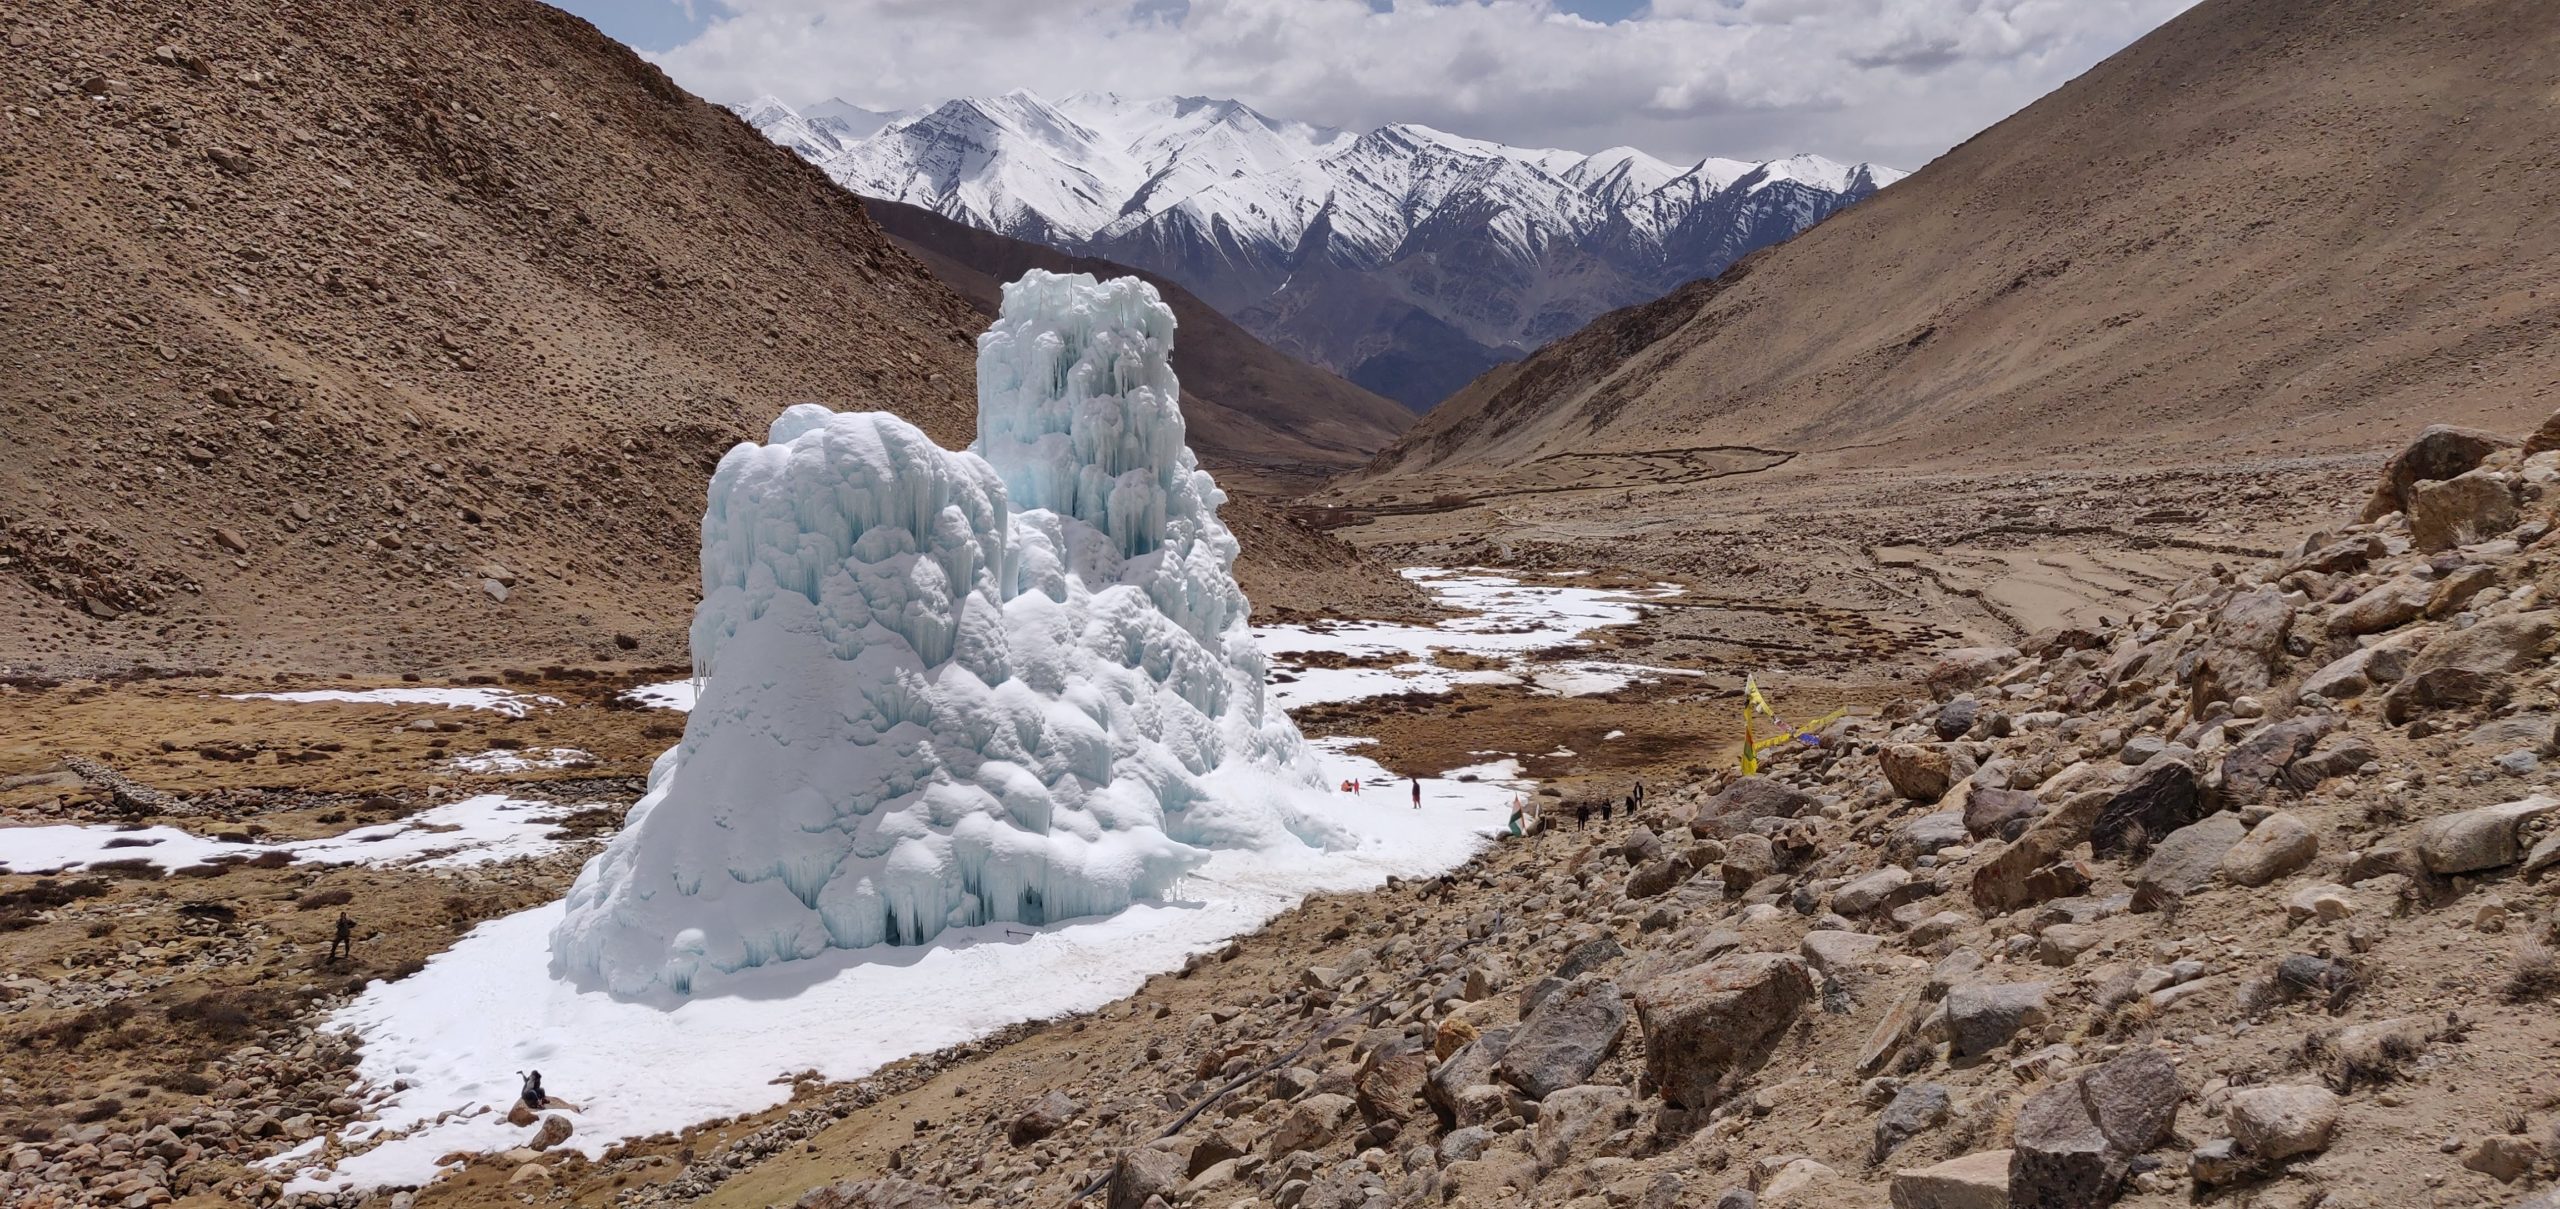 Two ice towers sit in a dry, brown valley of stone, soil, and sparse winter vegetation, with snowy mountain peaks in the background. People appear as tiny figures standing around the edges of the towers.